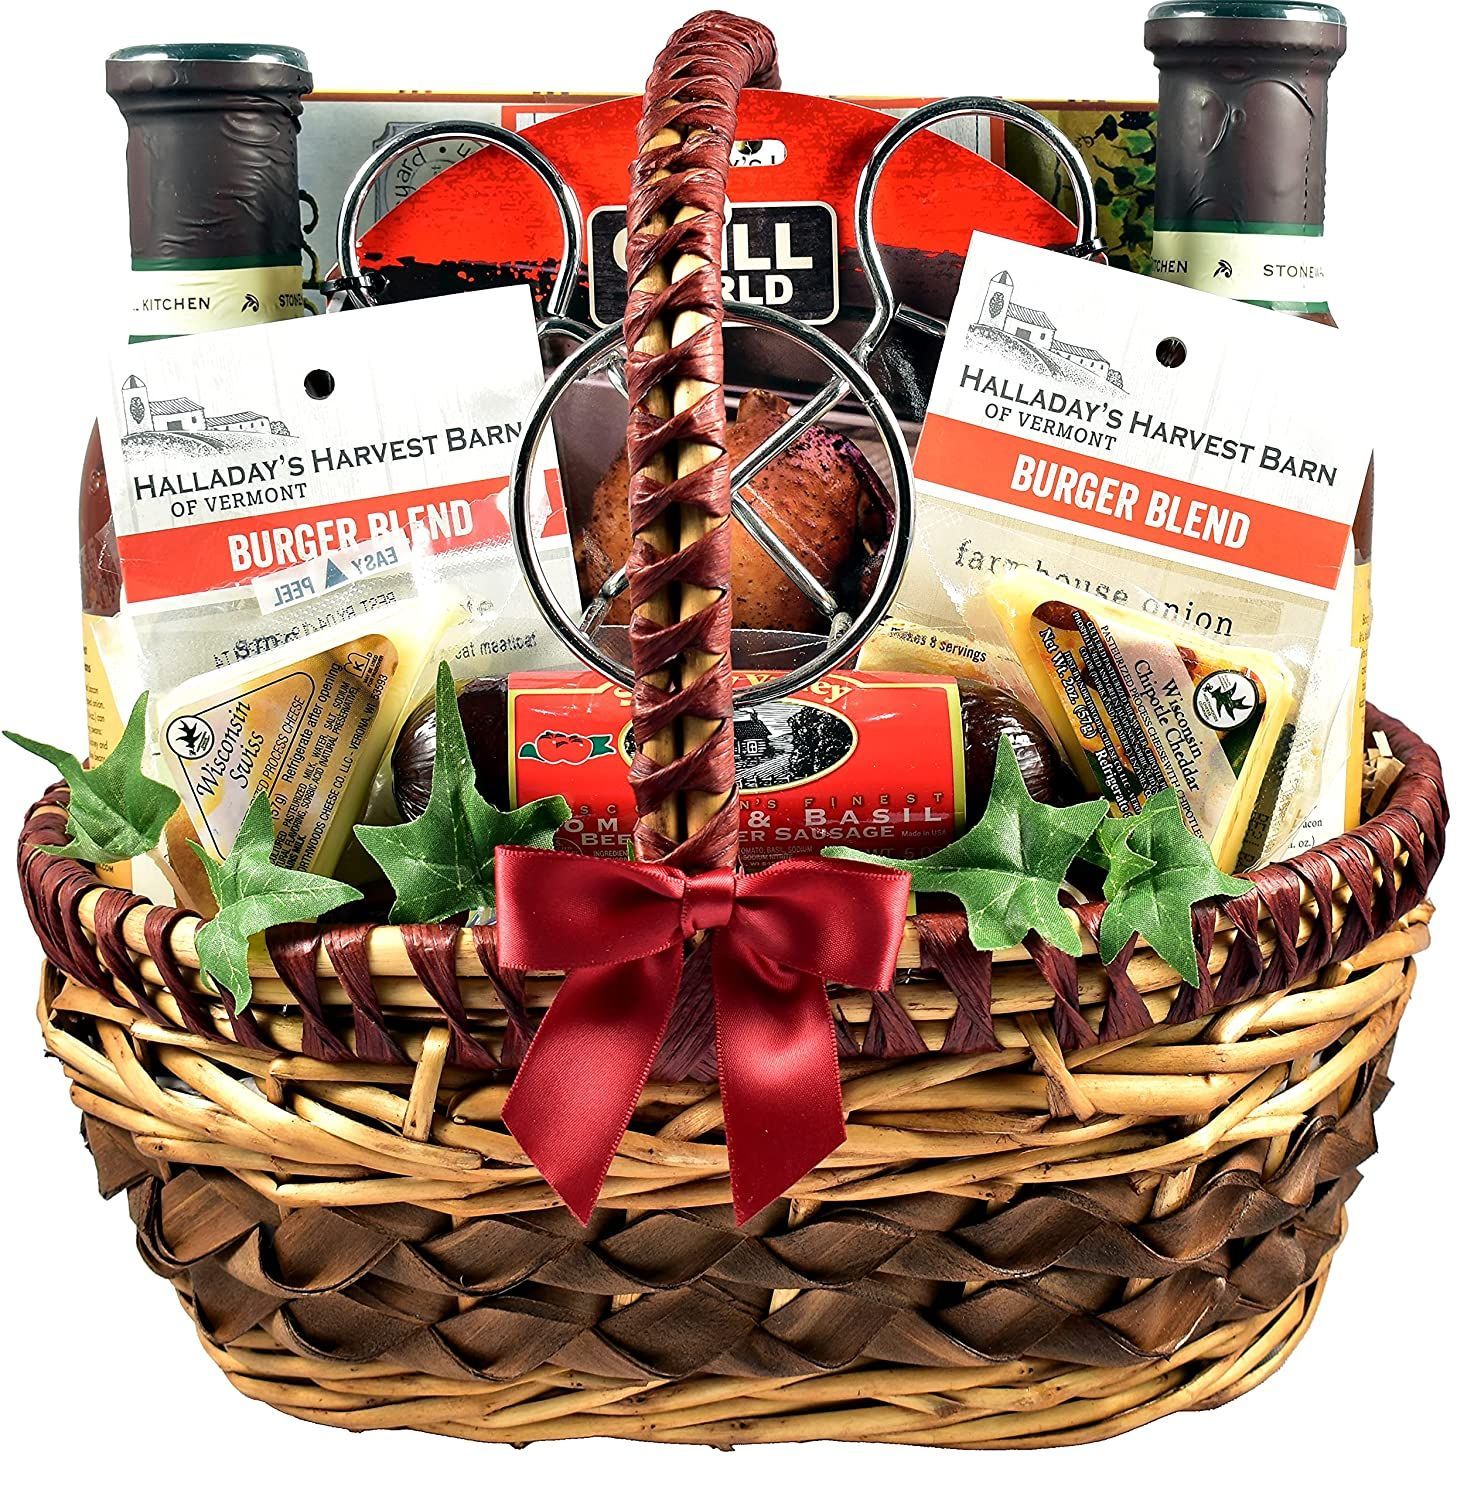 Easter Basket For Adults - Unique Gift Ideas
